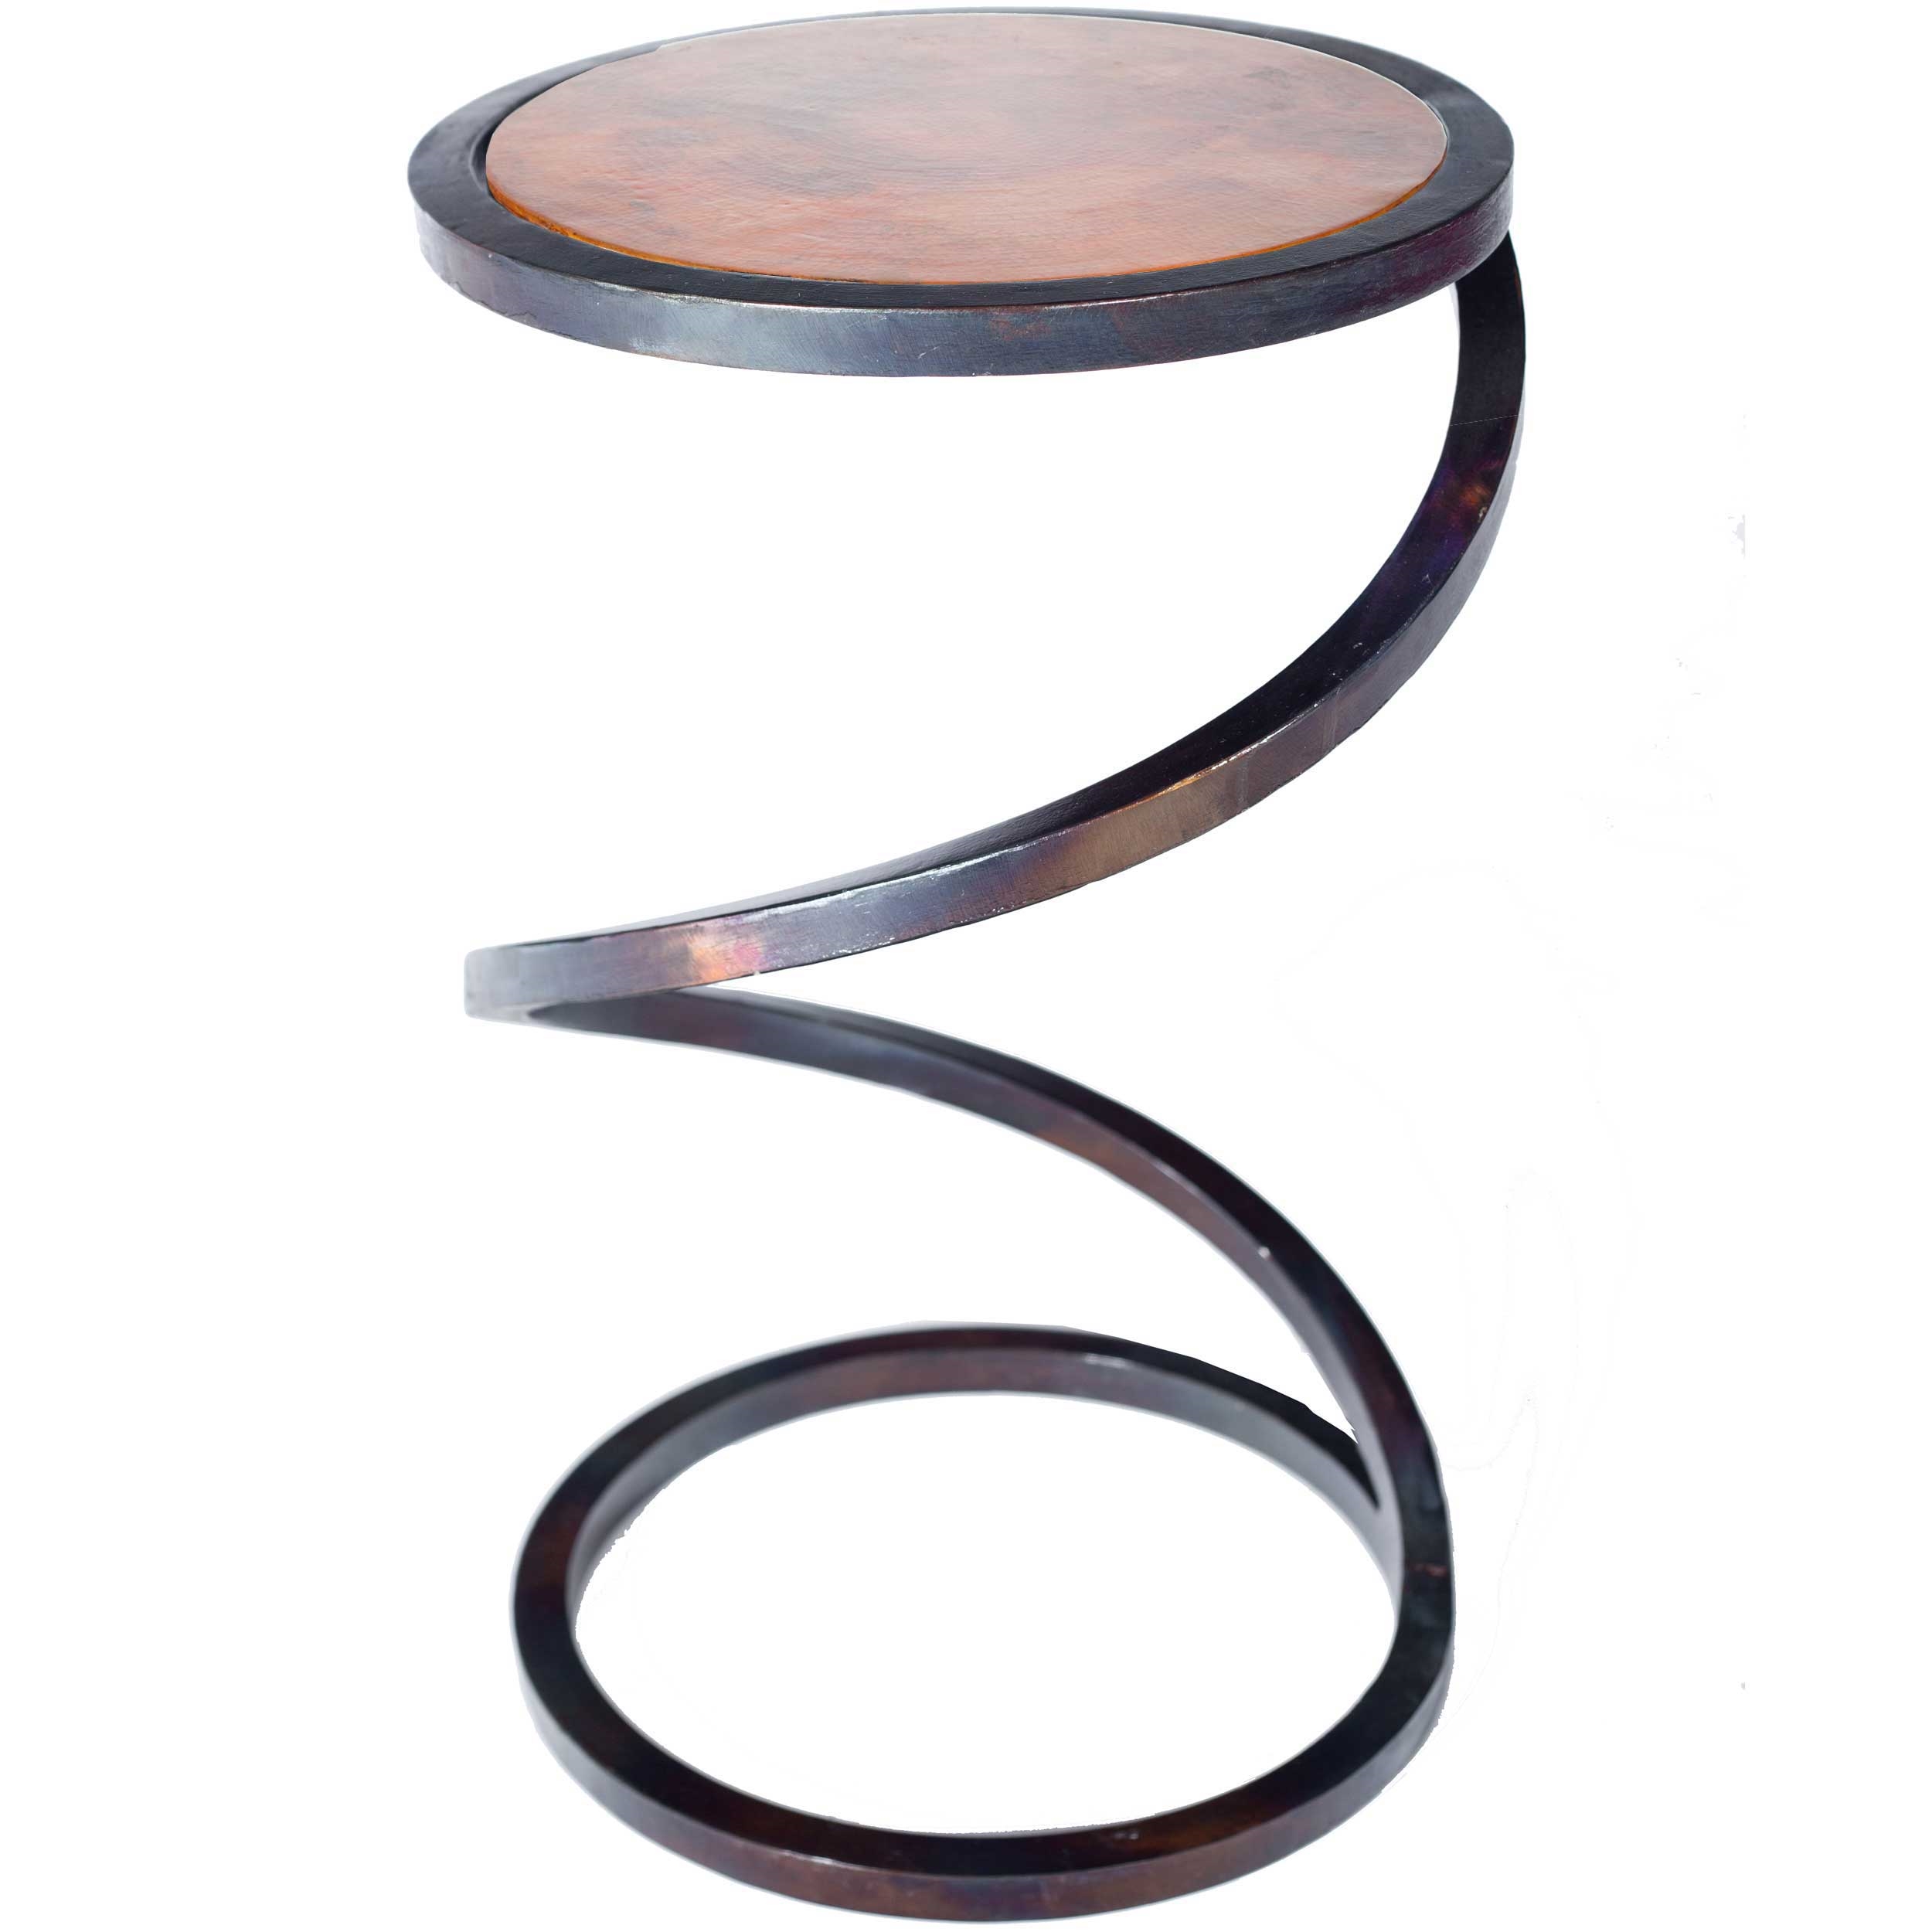 spiral round iron accent table with hammered copper top twi metal wrought base and larger small light media console high bar kitchen black wine rack white garden coffee tall